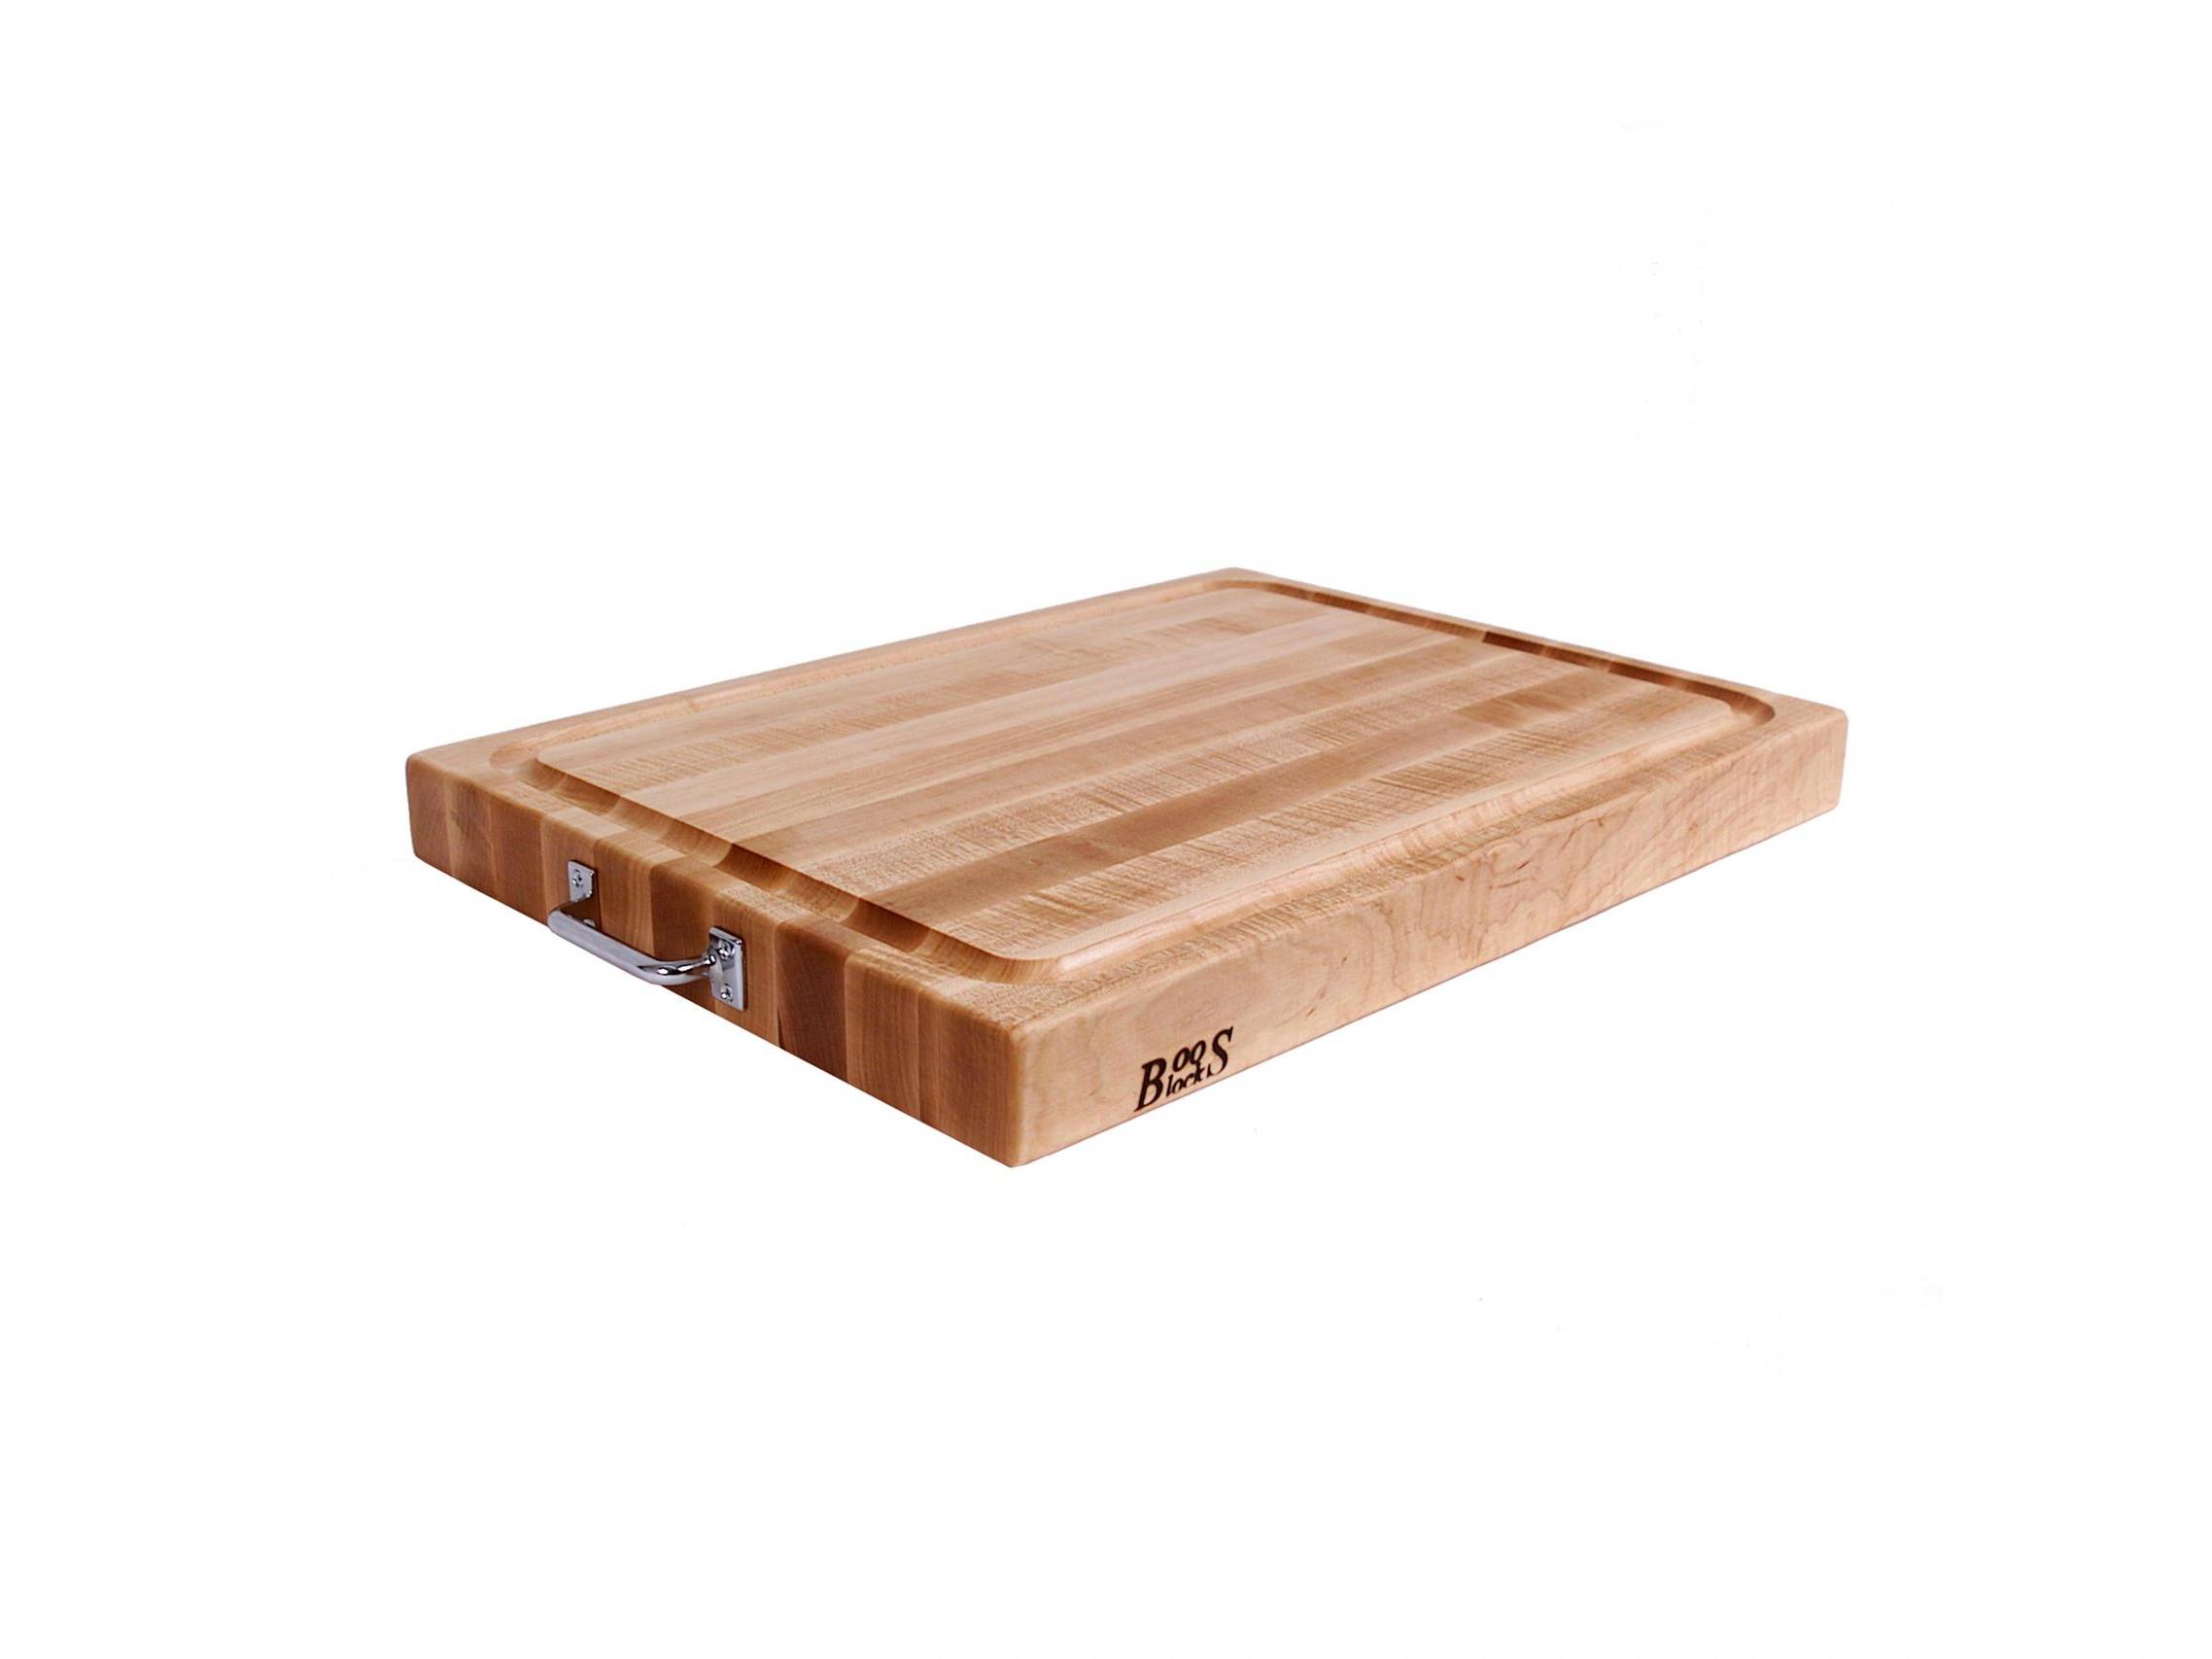 Prep-N-Serve Hard Maple Cutting Board with Juice Groove, Stainless Steel Handles; Can Be Used on Both Sides 55